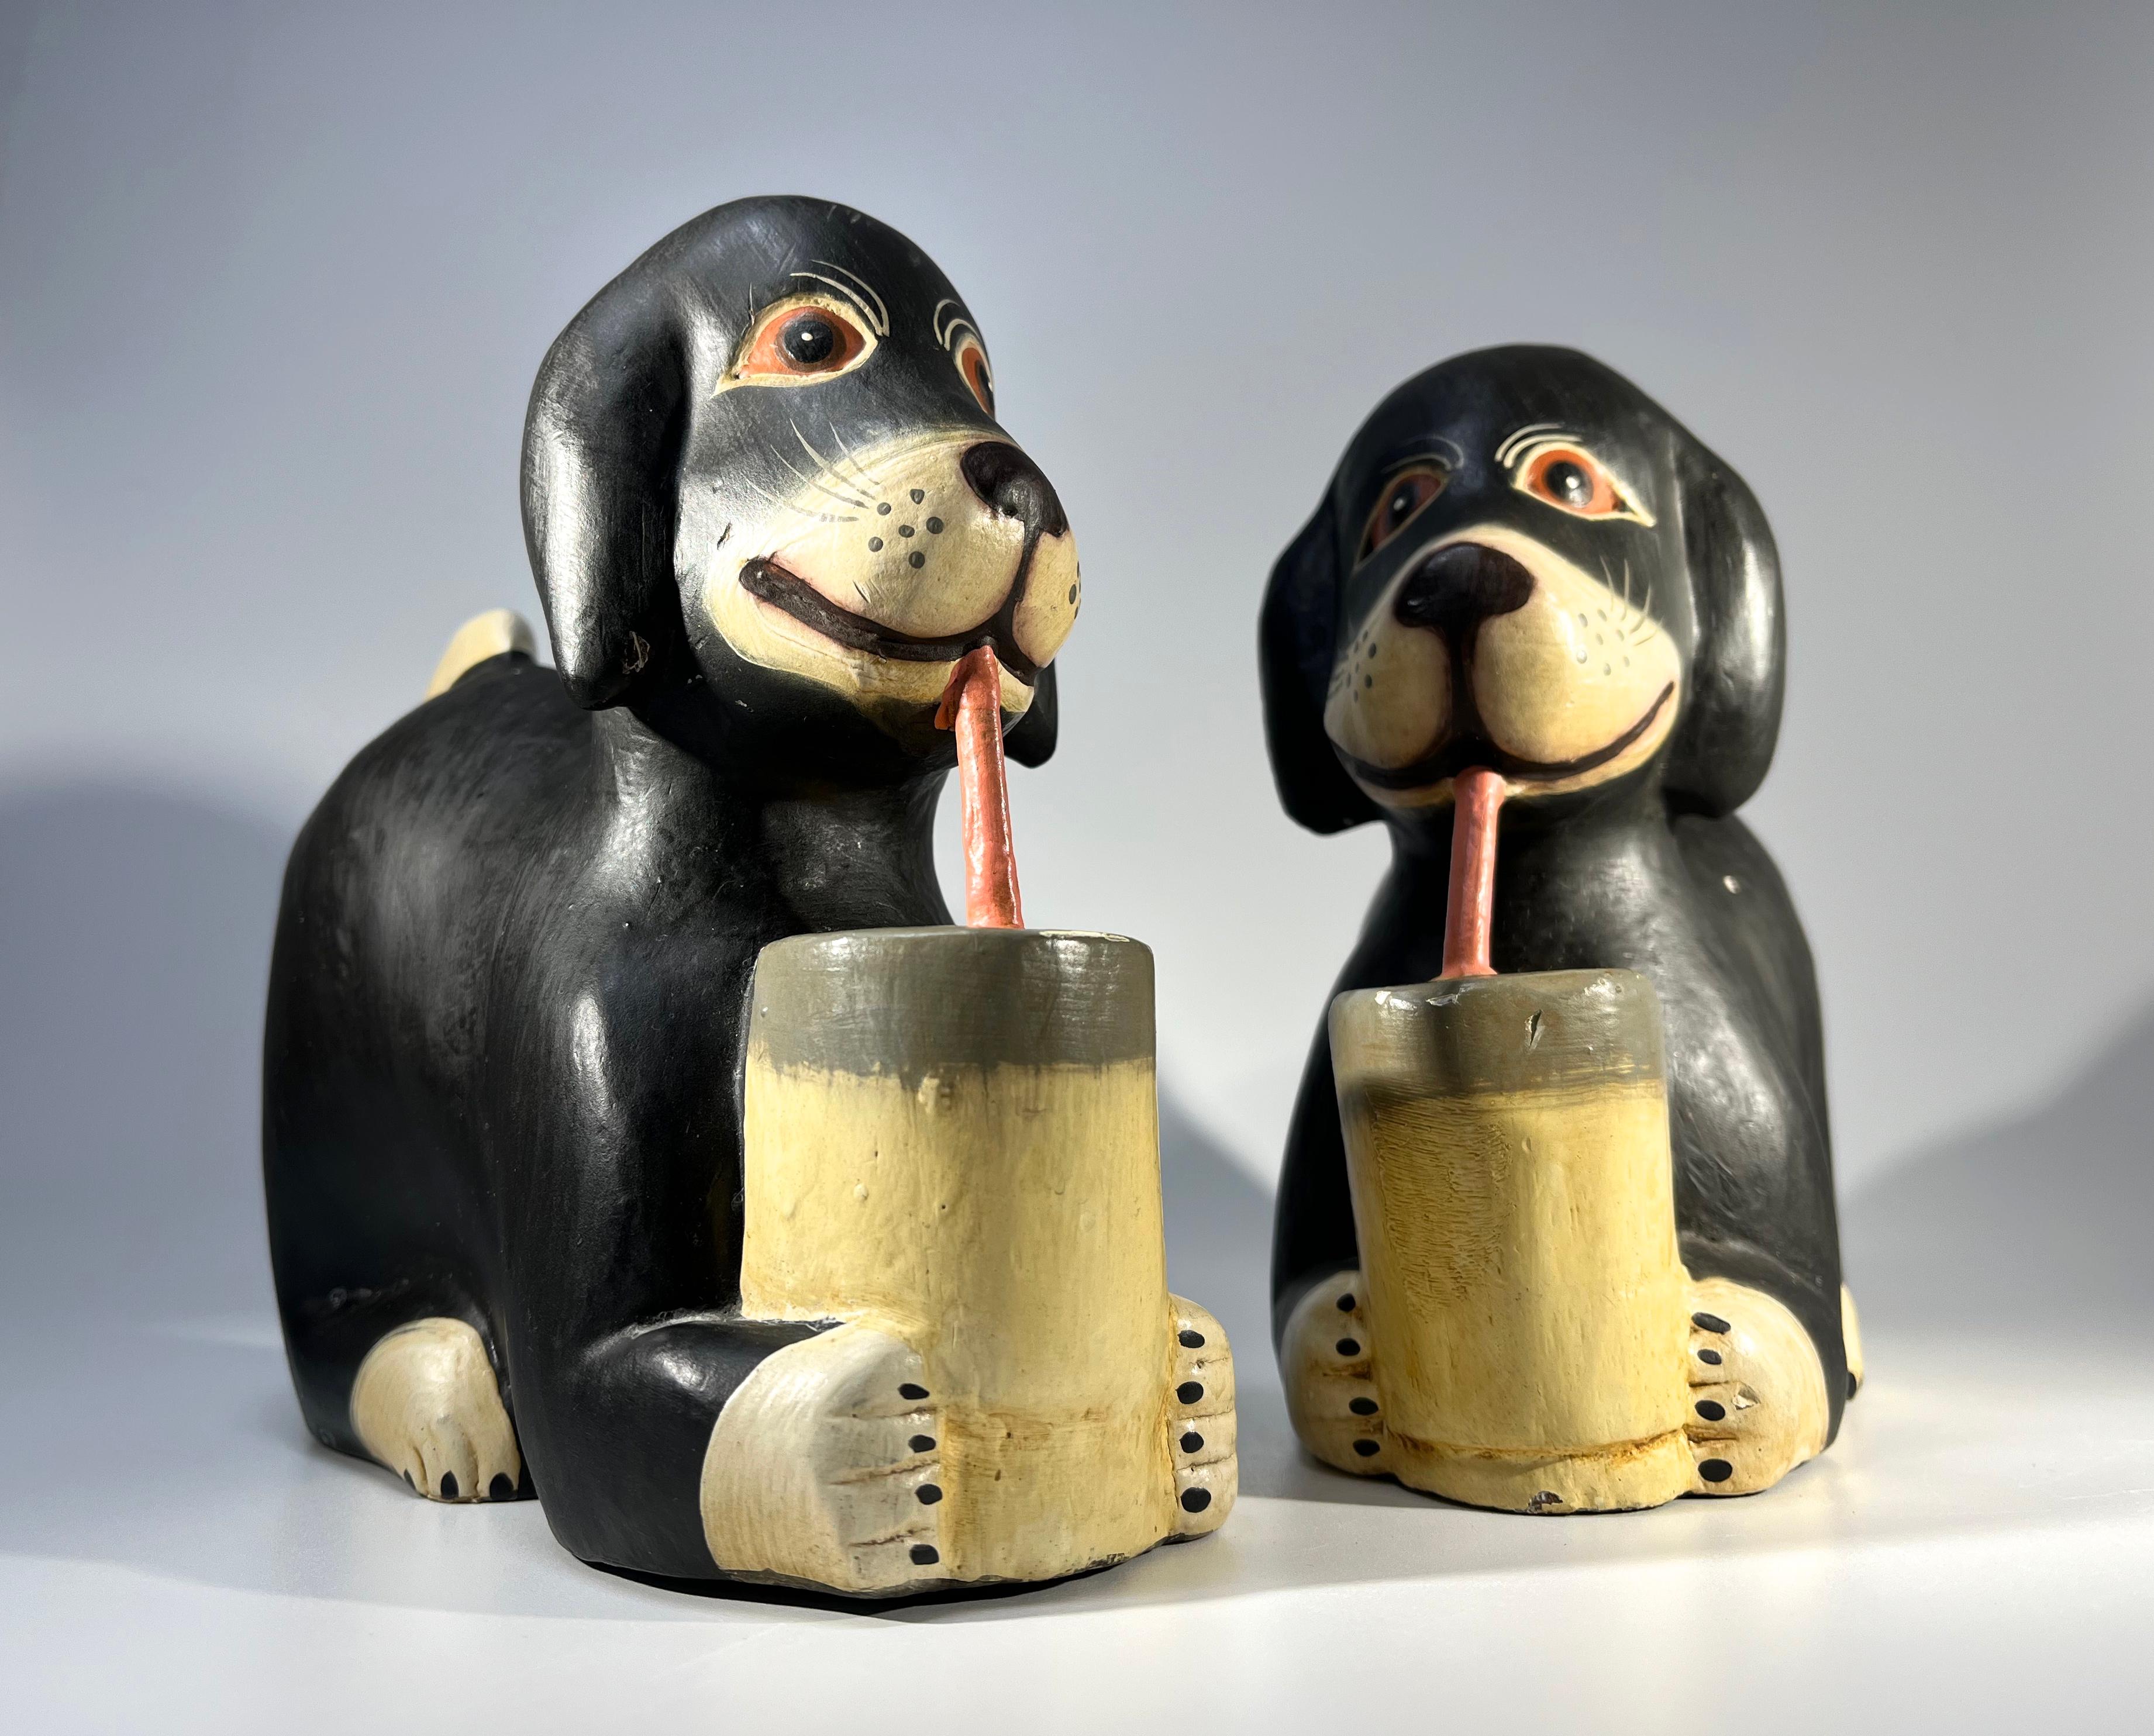 Utterly mystifying pair of dogs enjoying what appears to be drinking through straws
An eccentric pair of carved lightweight wood figures
Possibly unique, certainly novel
Perhaps circa late 20th Century
Height 6.5 inch, Width 3.25 inch, Depth 6.5